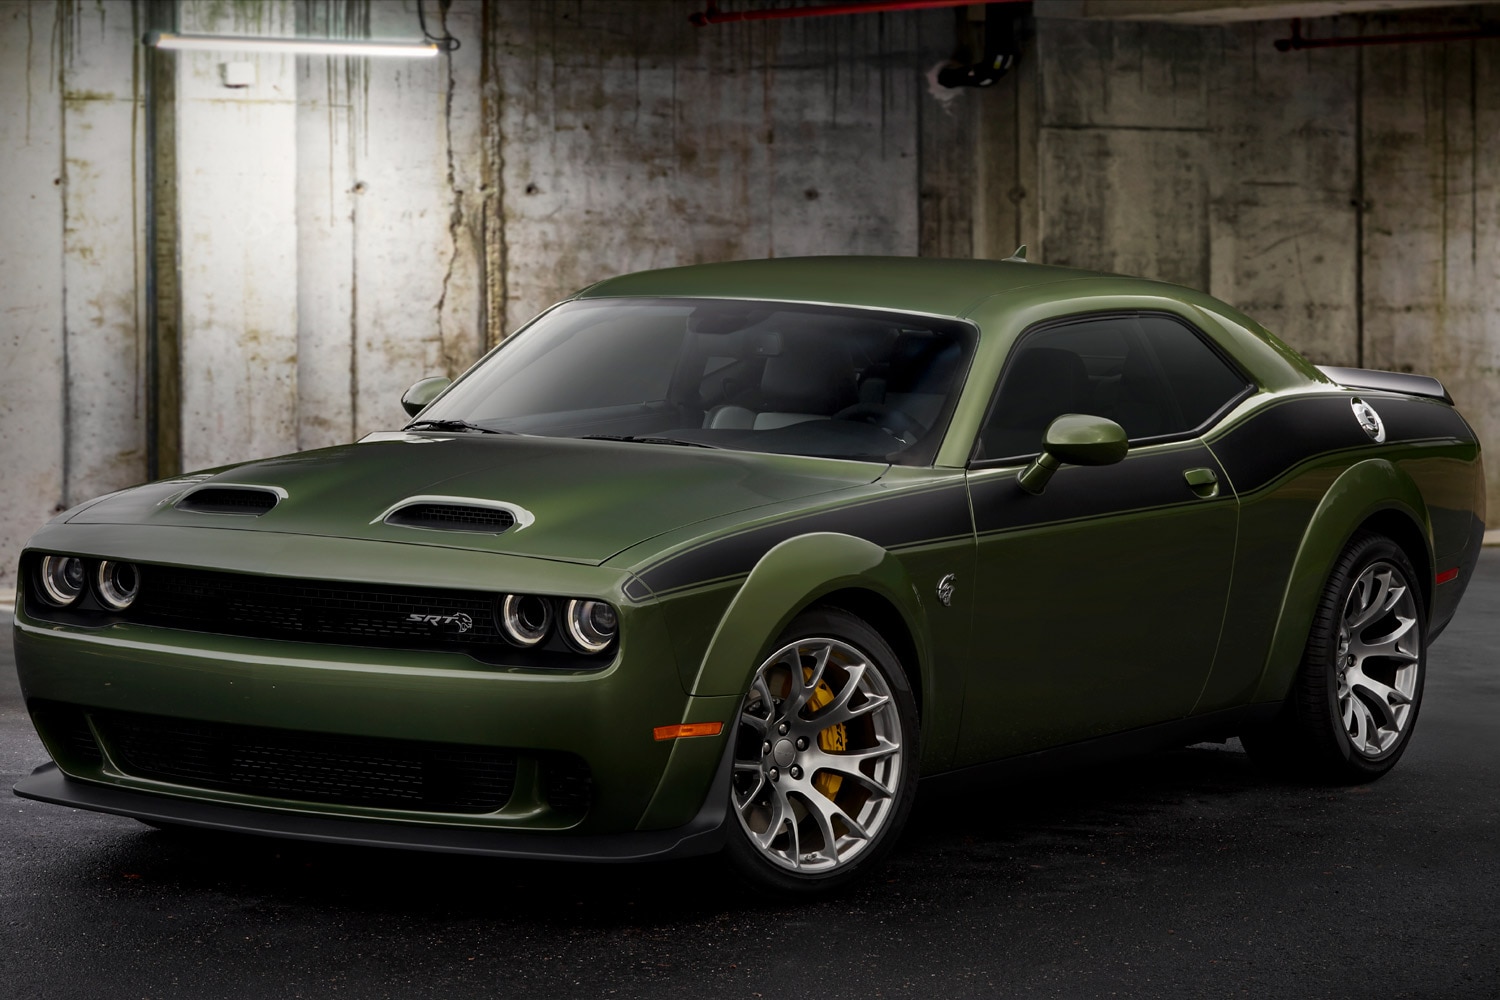 The Most Powerful Muscle Car in The World: 1,025 Horsepower Dodge